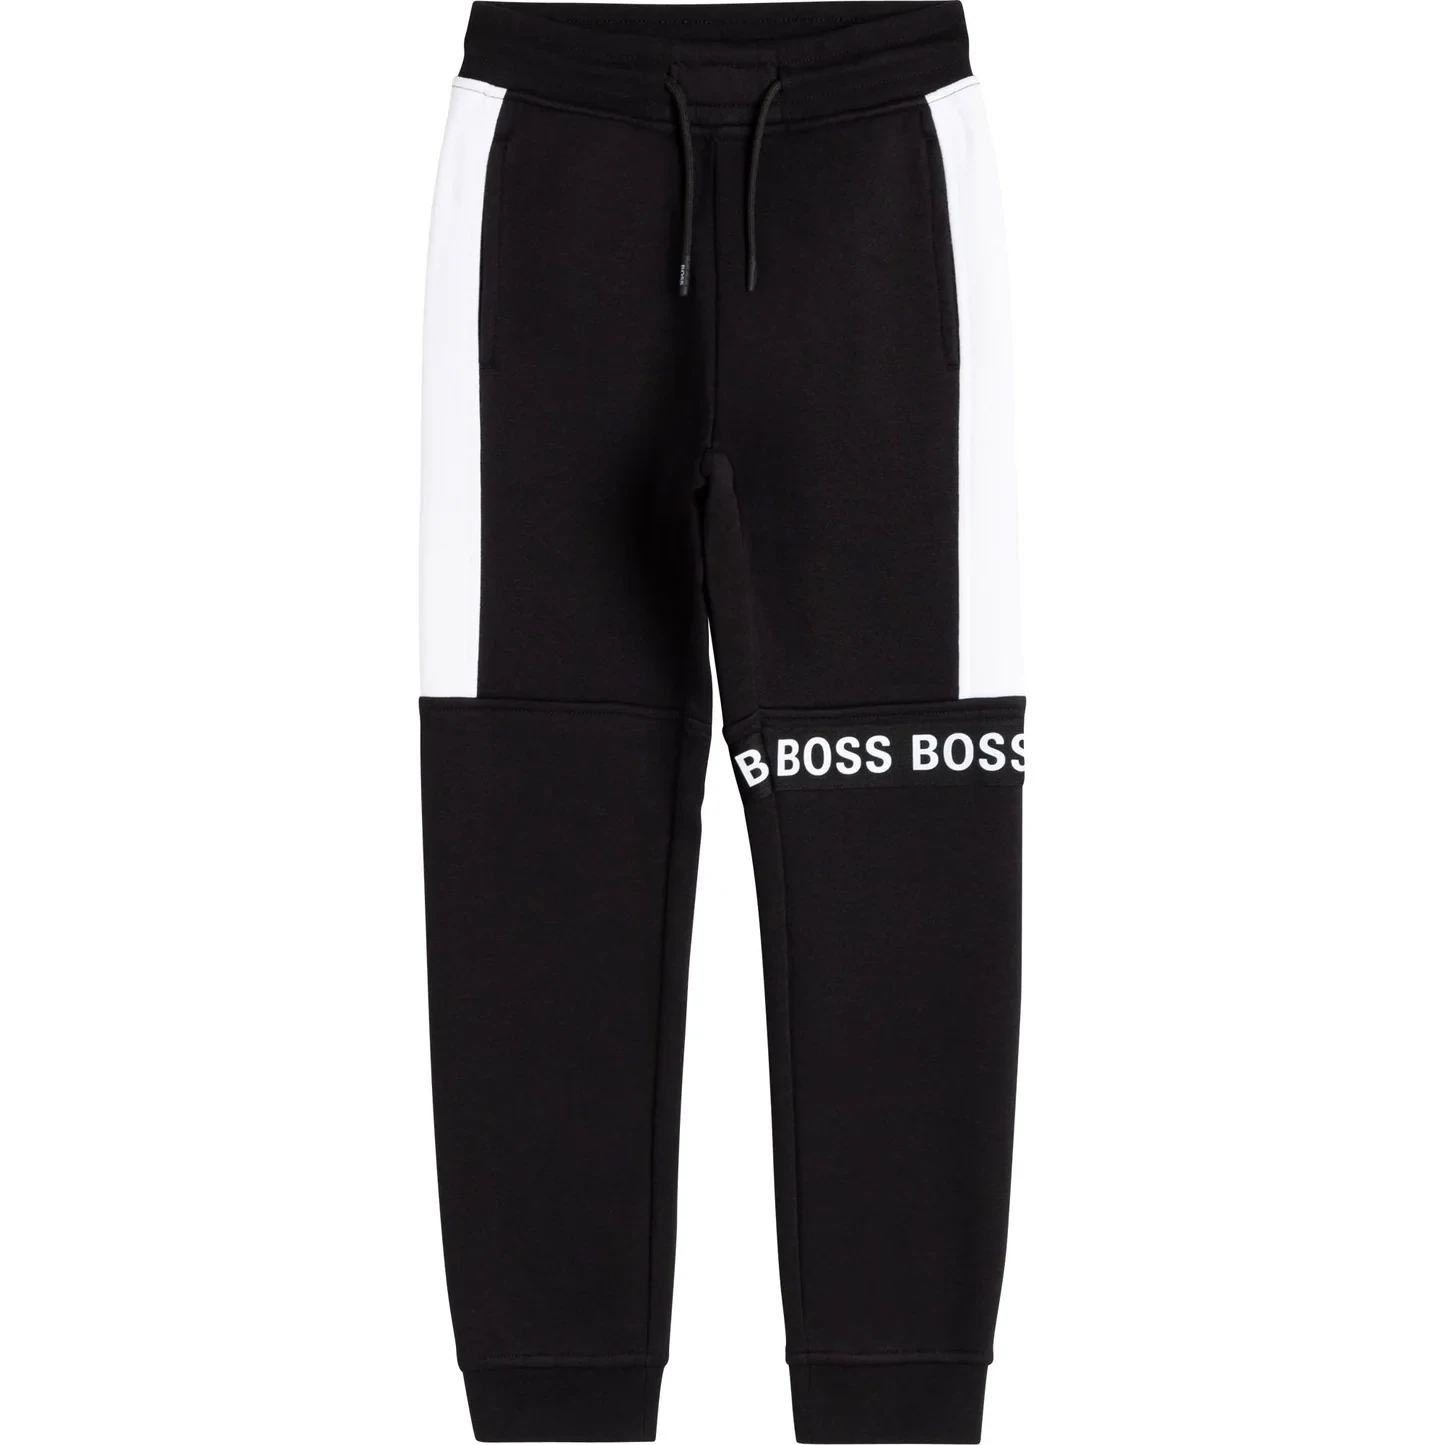 Hugo Boss black joggers with white stripe and logo for boys youth J24720/09B, Size: 10